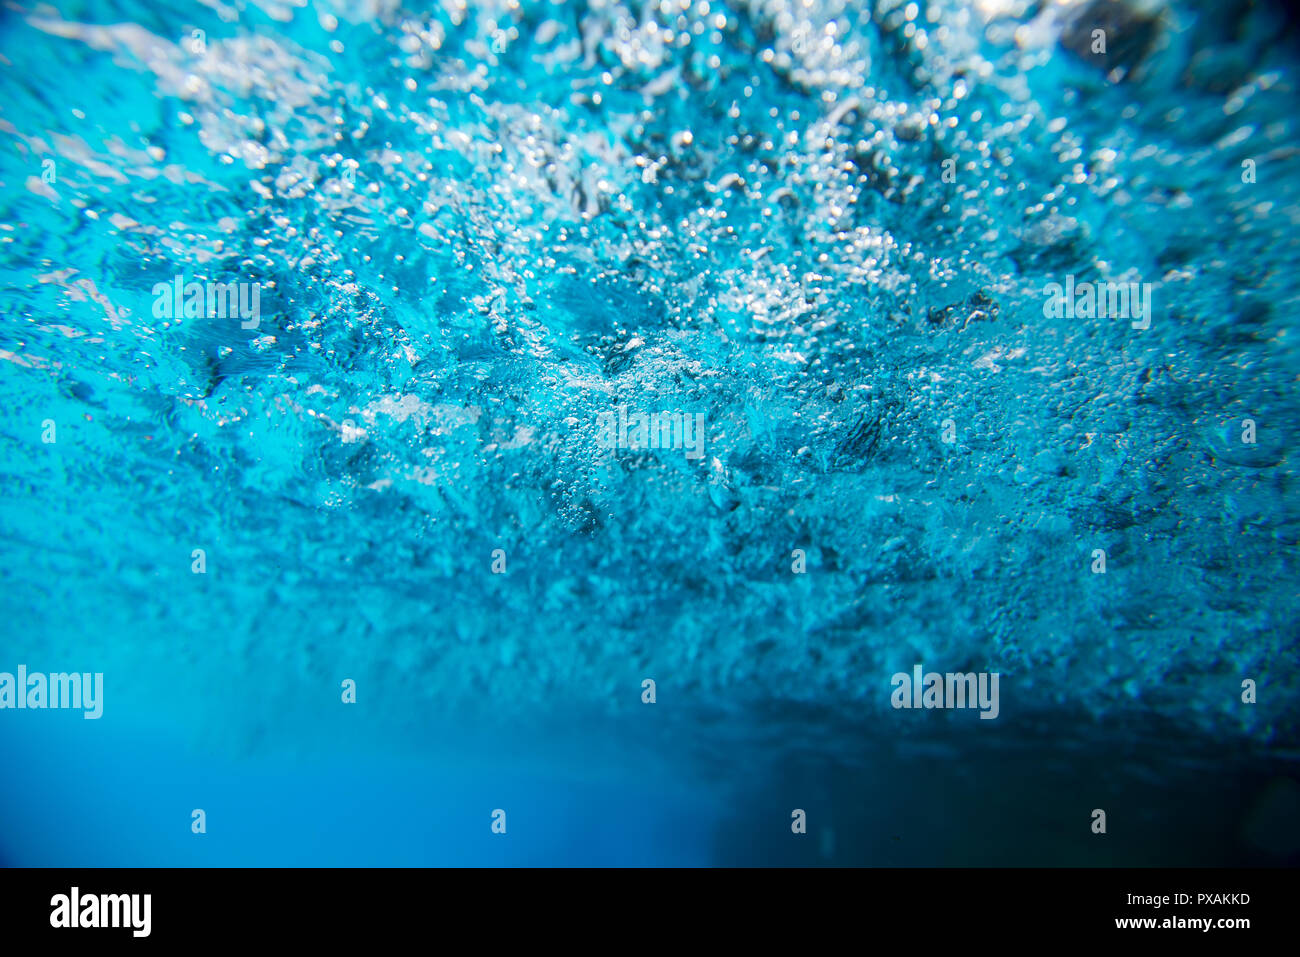 surface water view from underwater Stock Photo